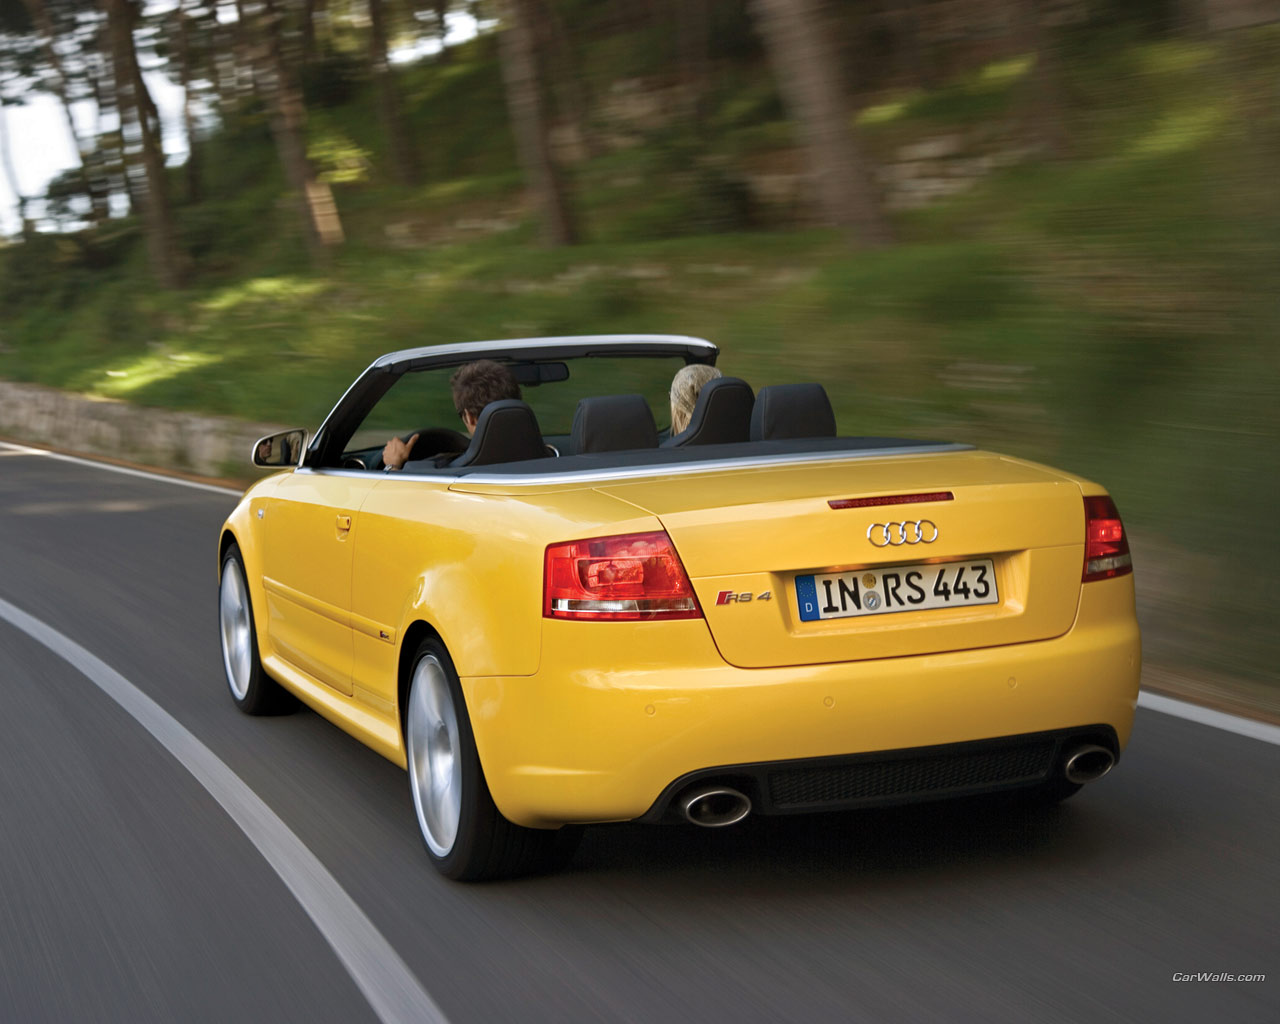 Download Audi A4 RS4 Cabrio Walpaper. The best sports Car ever. 2009 Audi A4 RS4 Cabrio Wallpaper High Resolution Download.